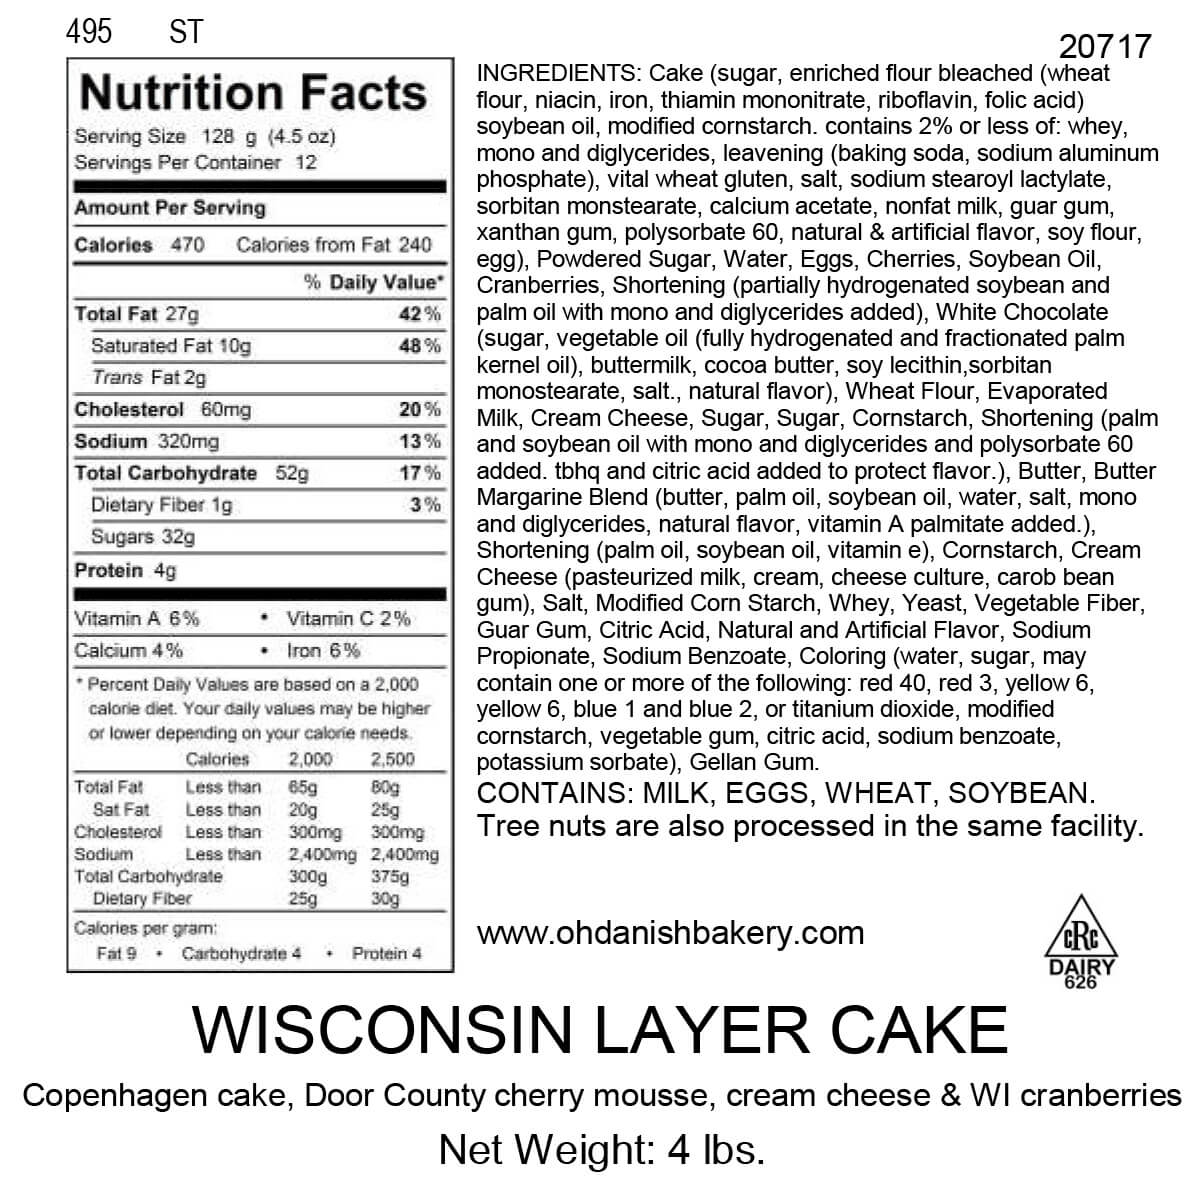 Nutritional Label for Wisconsin Layer Cake